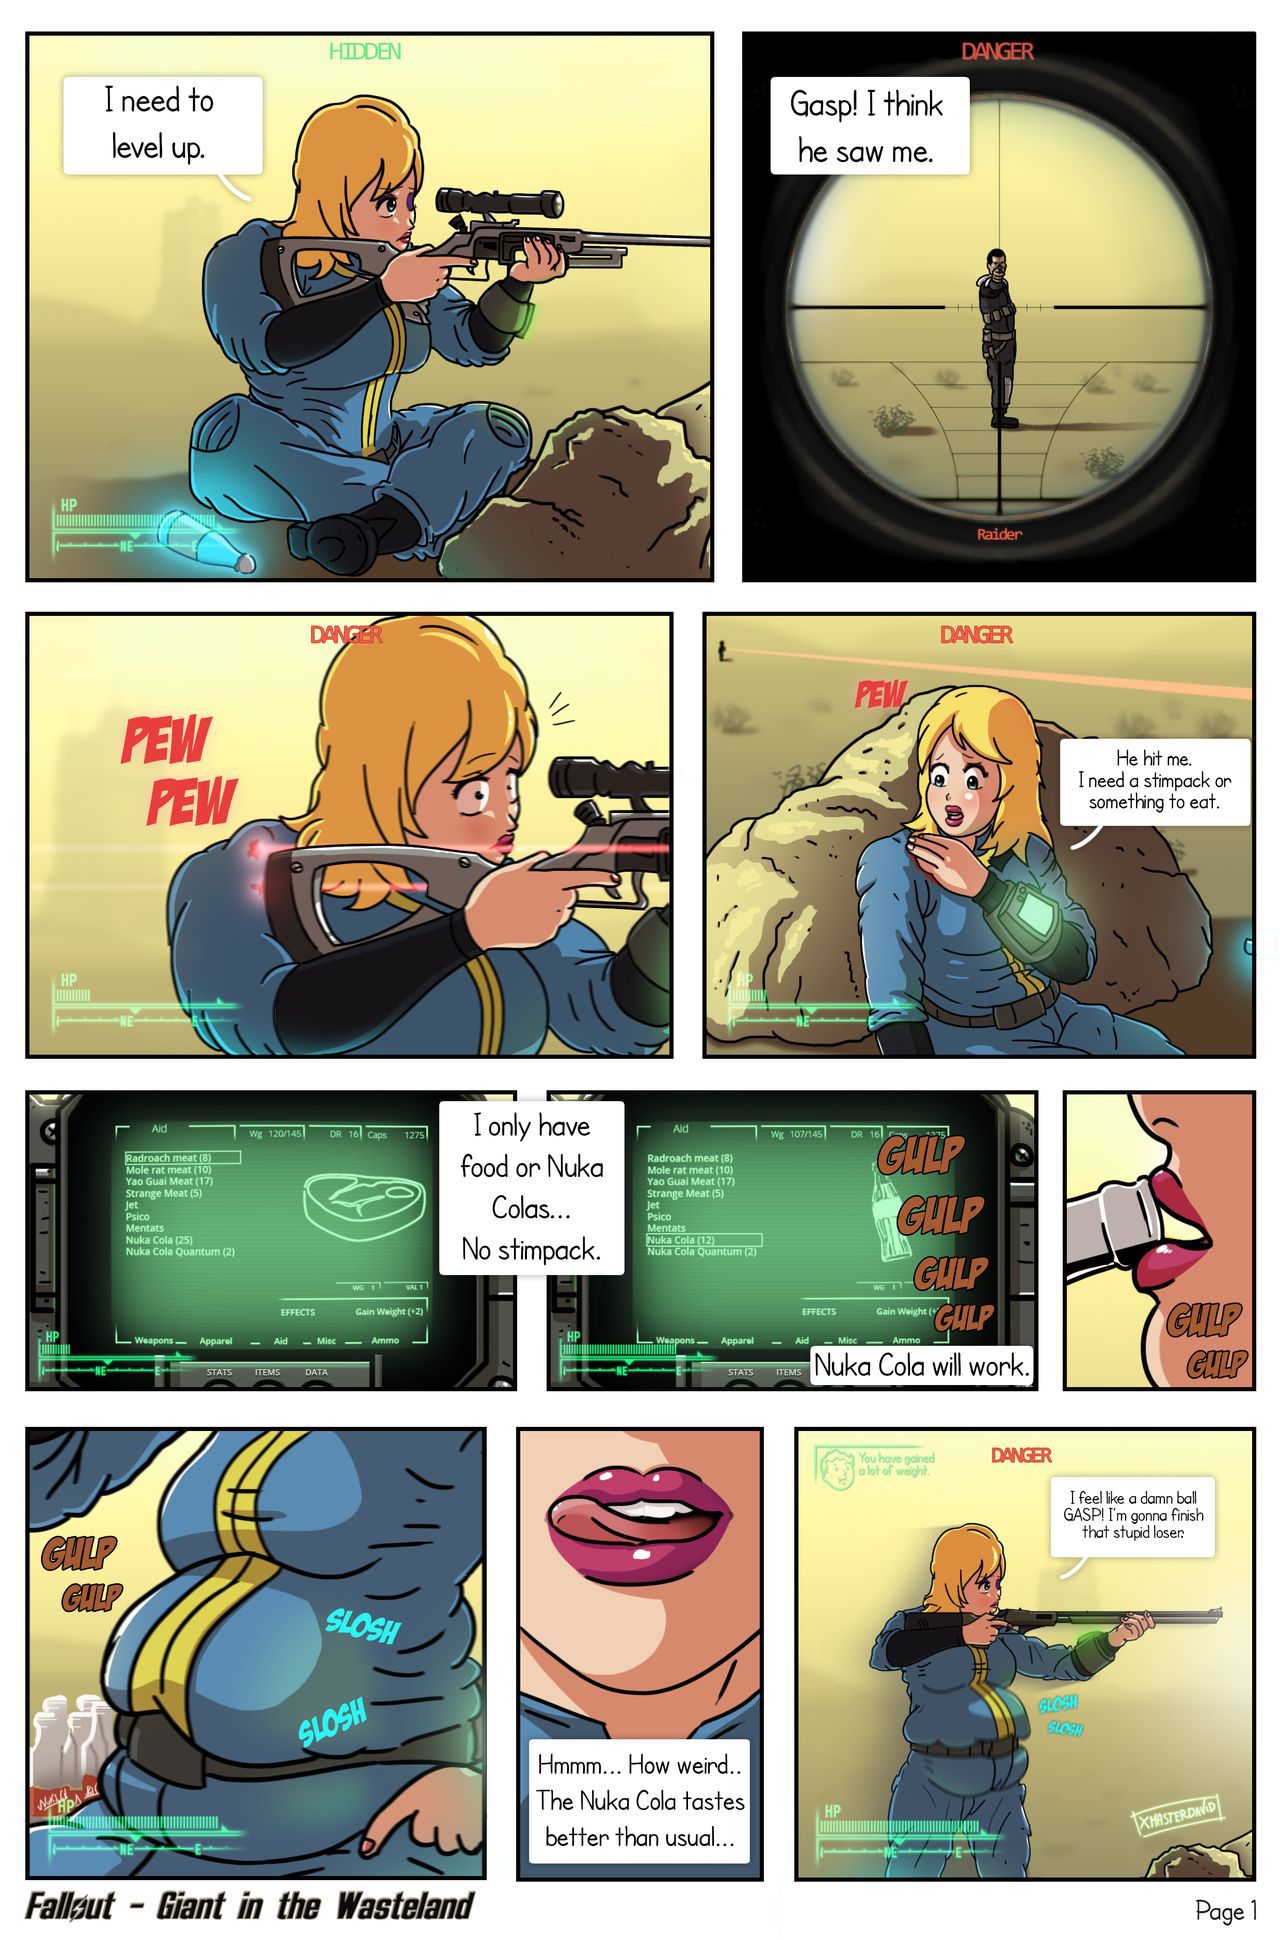 [xmasterdavid] Giant in the Wasteland (Fallout) [Ongoing] 1